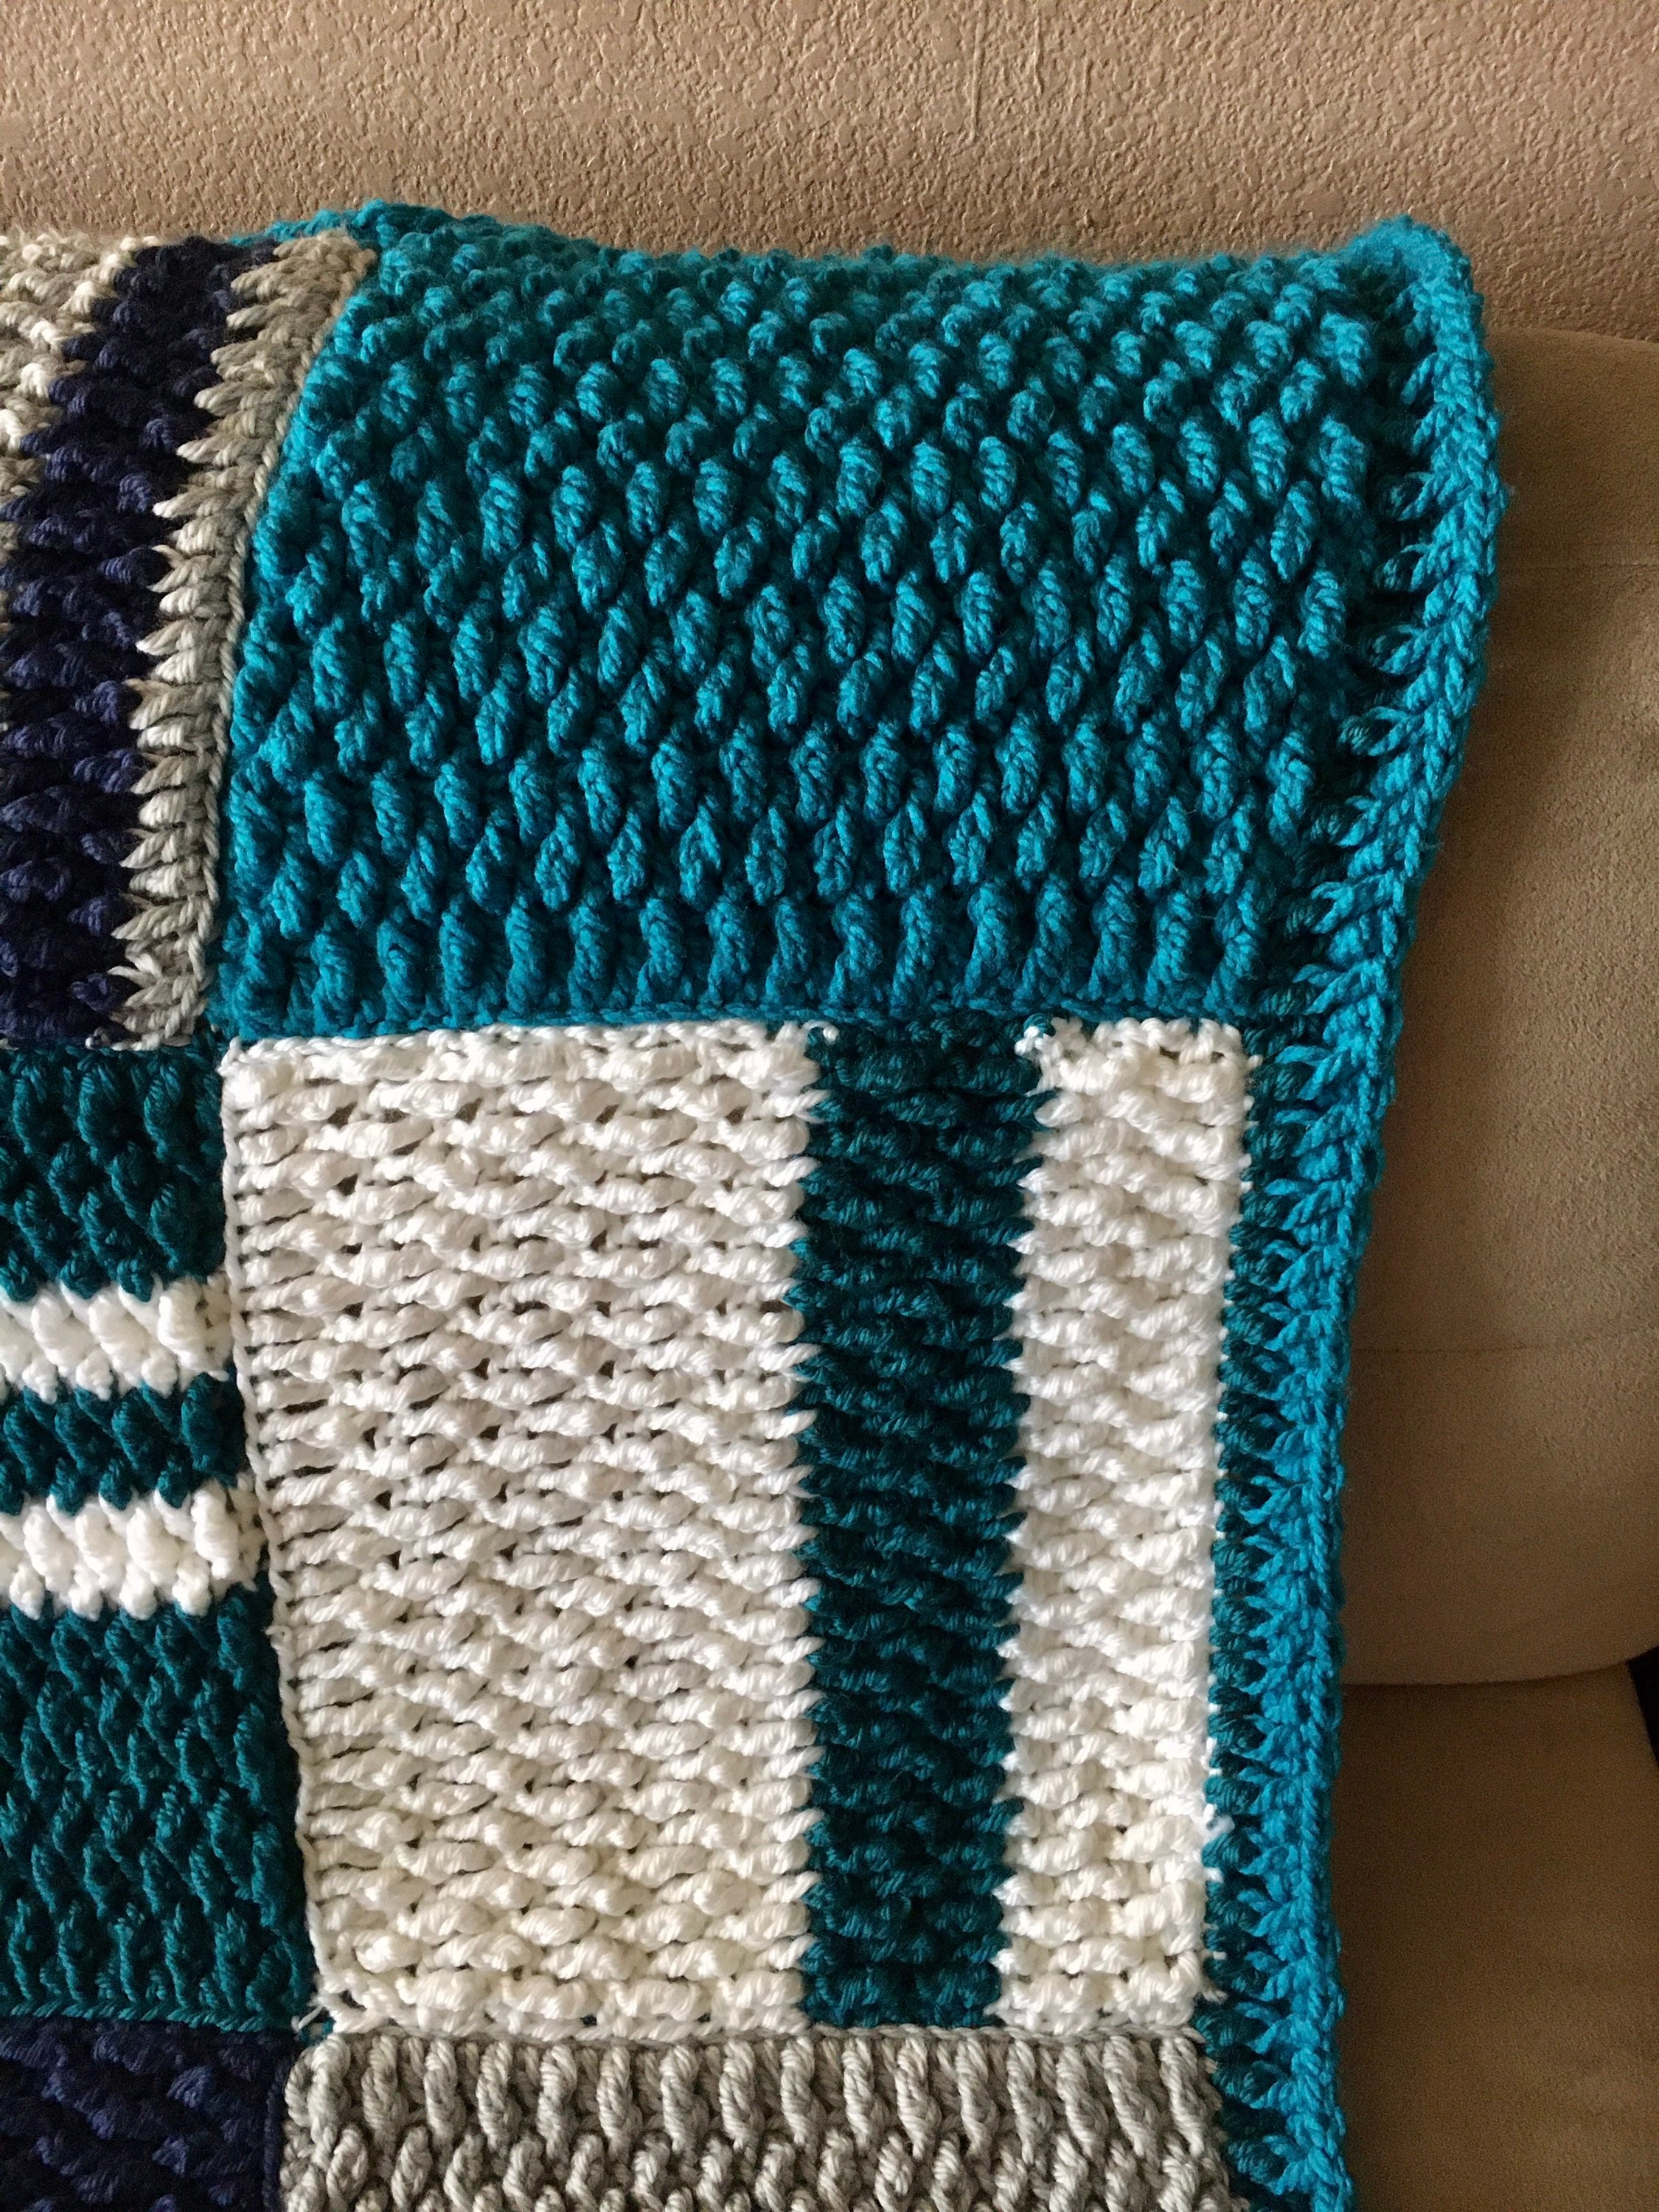 Turquoise Crochet Afghan Gray White Blue Teal READY TO SHIP - Etsy